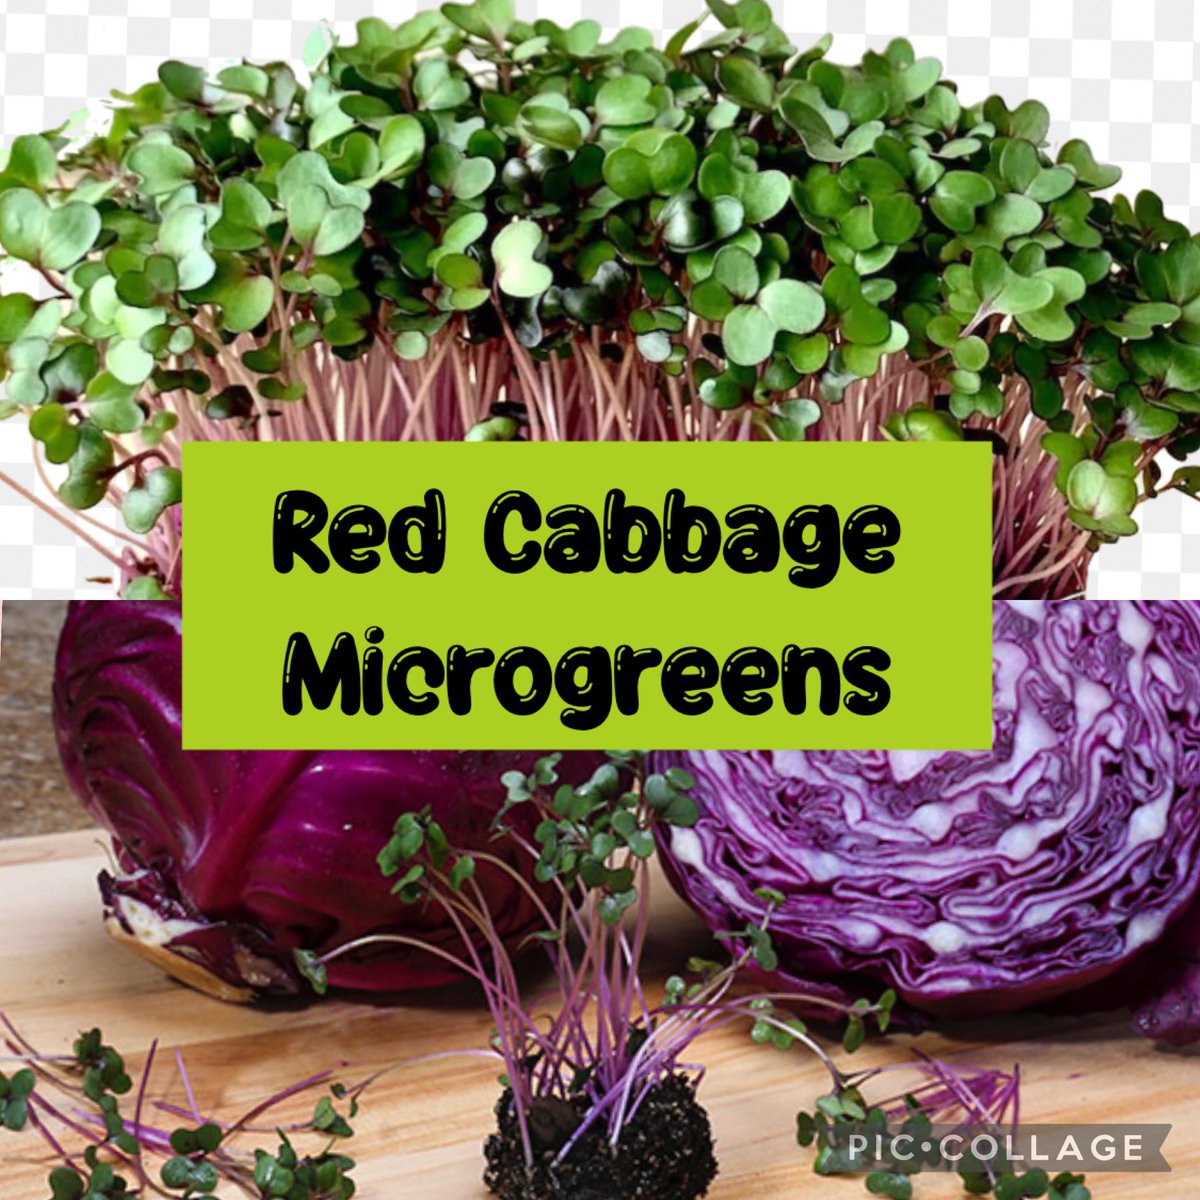 Cabbage microgreens' benefits include supporting blood clotting and building bones, preventing calcification or hardening of heart arteries, protecting the body from free radicals, and reducing the risk of chronic diseases.